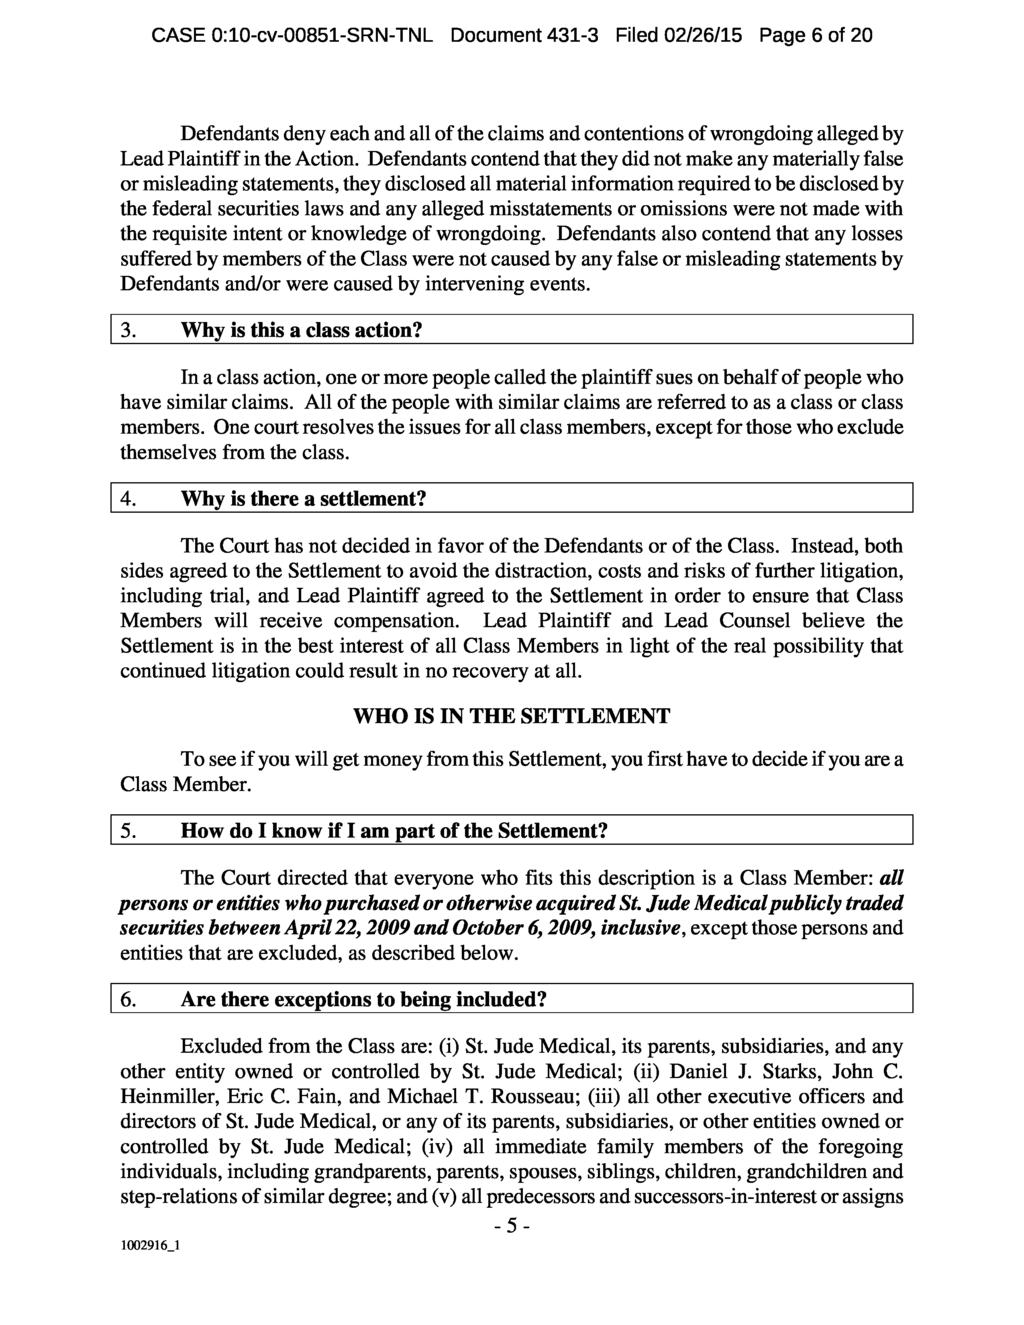 CASE 0:10-cv-00851-SRN-TNL Document 431-3 Filed 02/26/15 Page 6 of 20 Defendants deny each and all of the claims and contentions of wrongdoing alleged by Lead Plaintiff in the Action.